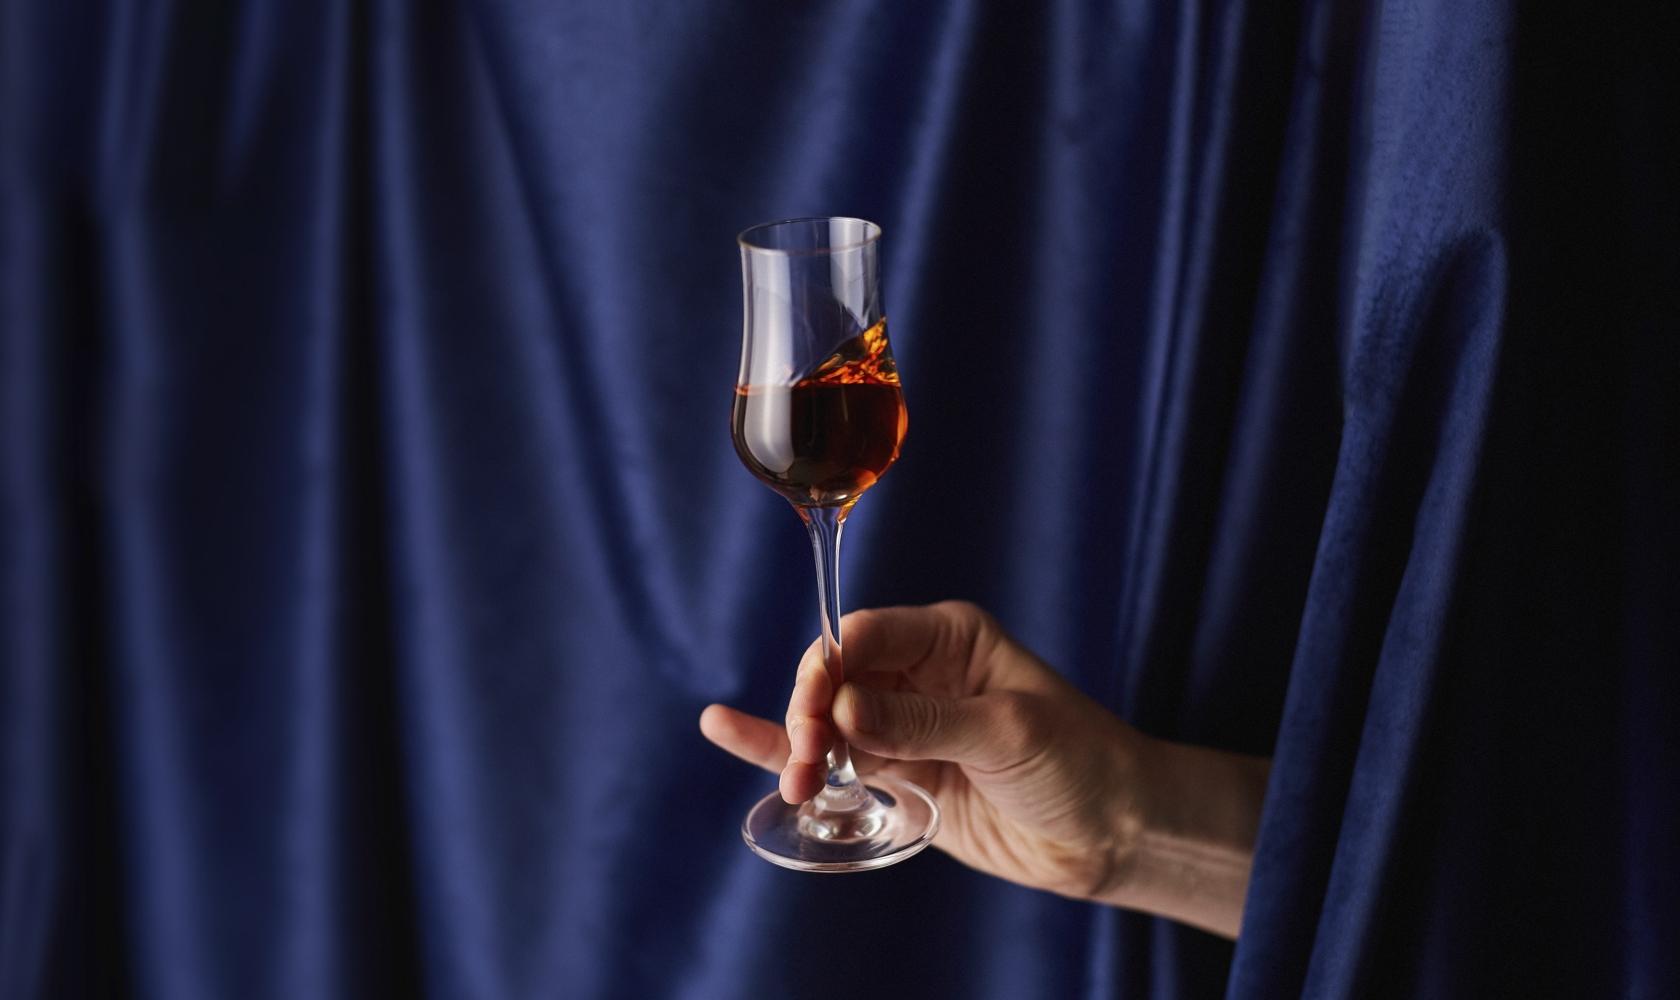 Tulip glass is perfect for tasting Cognac